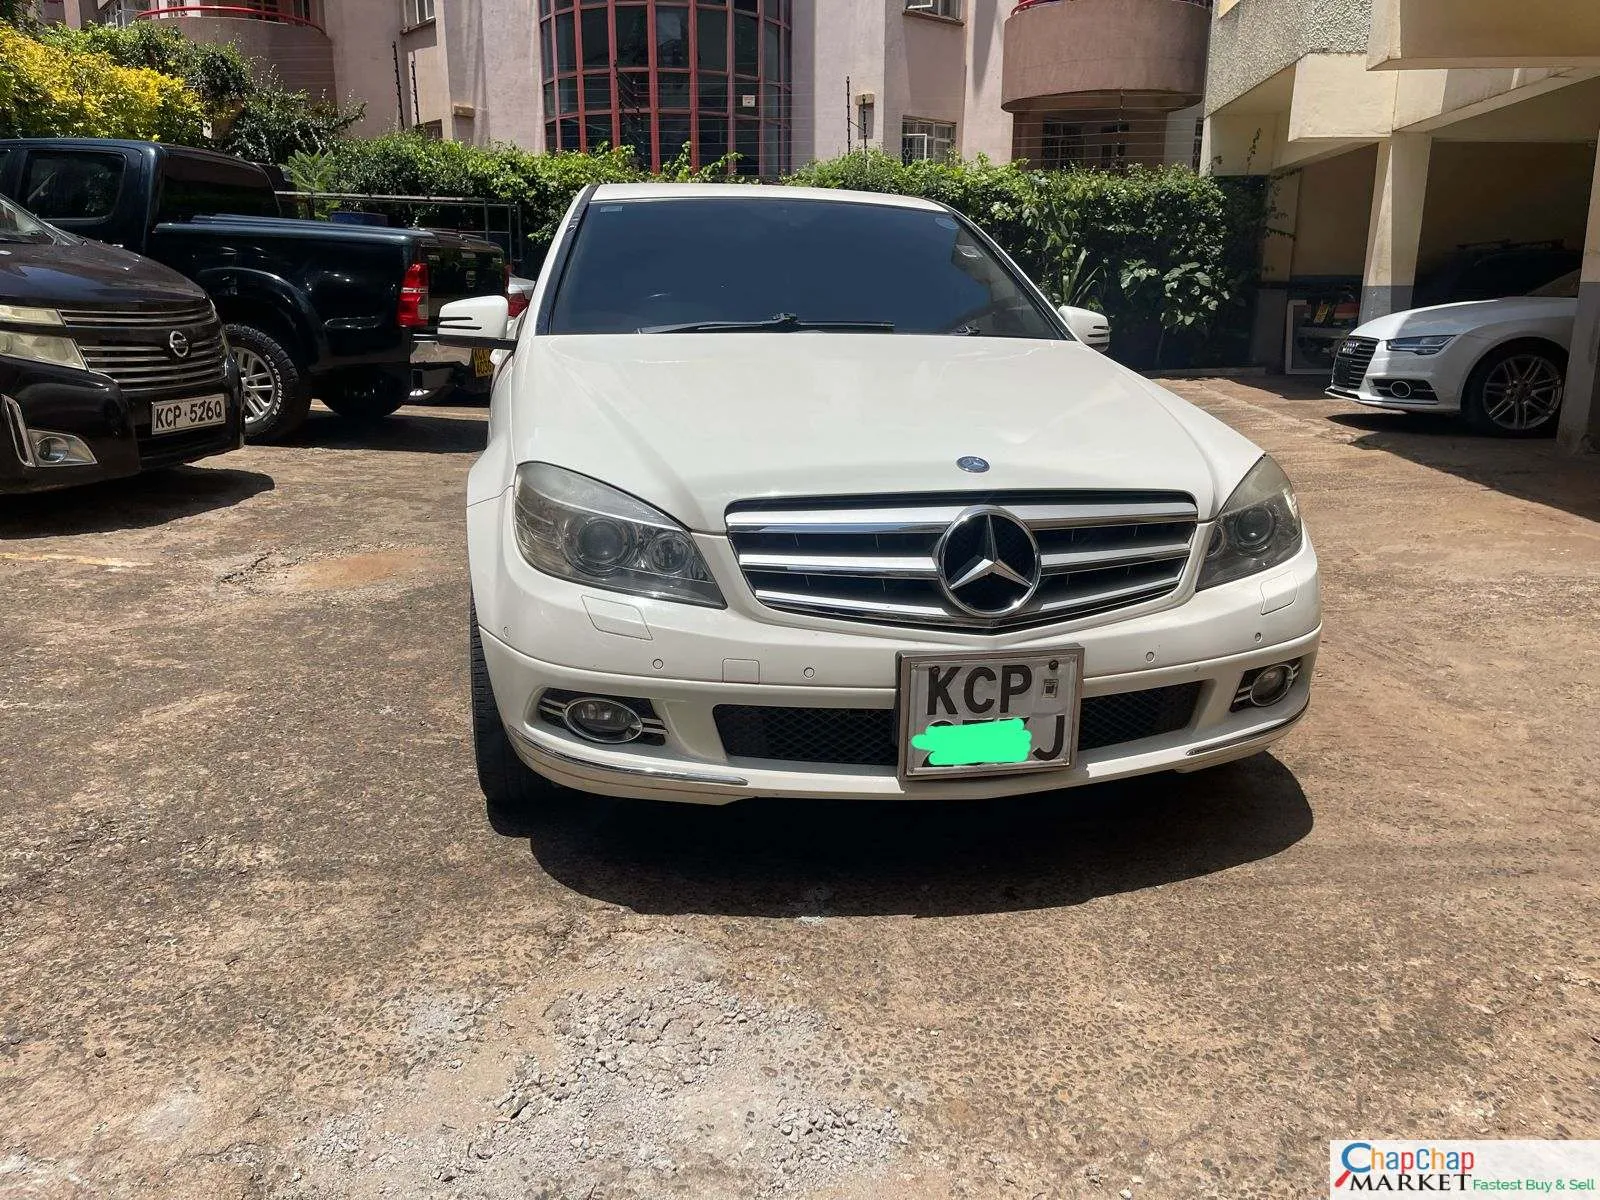 Cars Cars For Sale-Mercedes Benz C200 for sale in Kenya You Pay 30% DEPOSIT Trade in OK EXCLUSIVE New hire installments 4